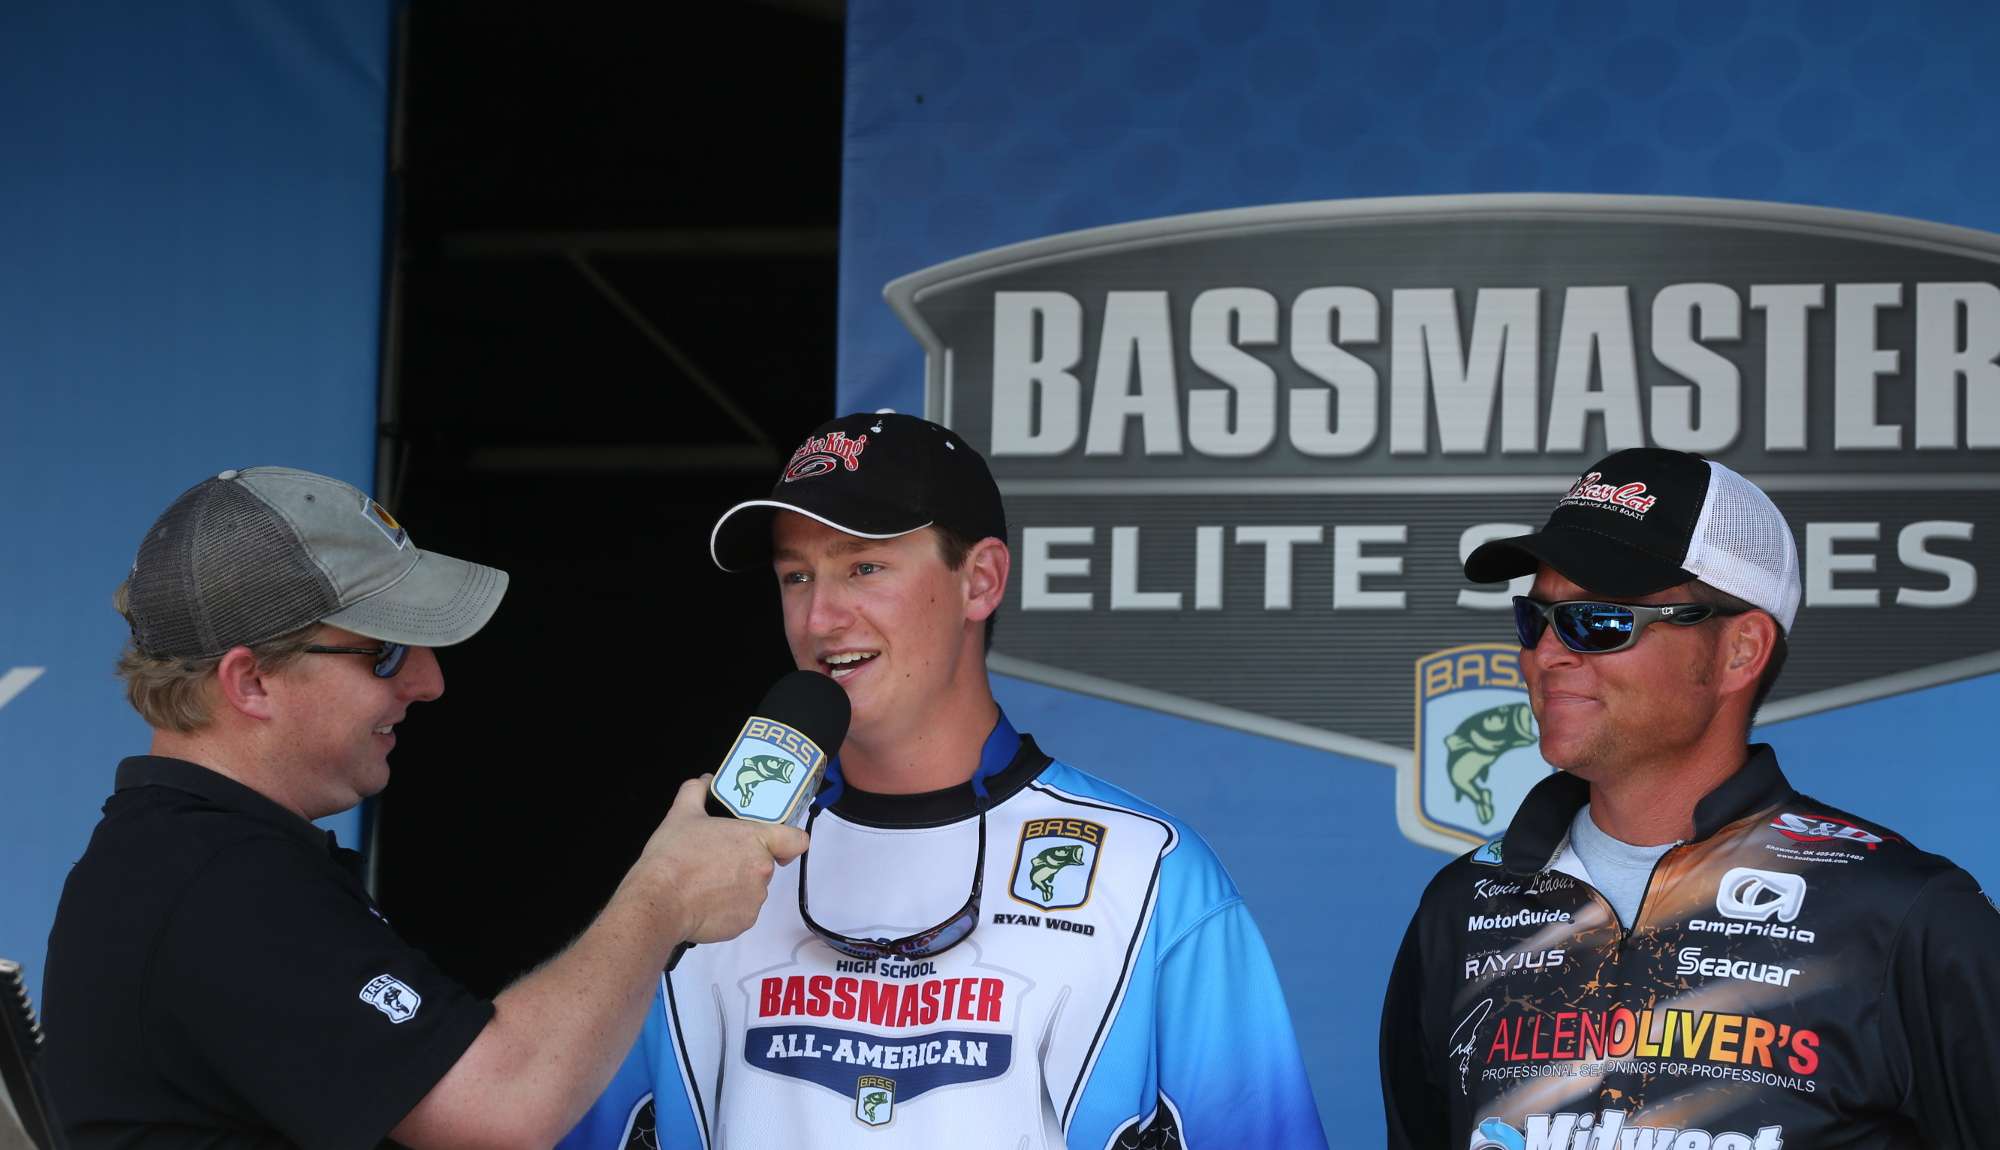 Although All-American Ryan Wood and Elite Series angler Kevin Ledoux didnât weigh a fish, they had a fun day on Lake Barkley.